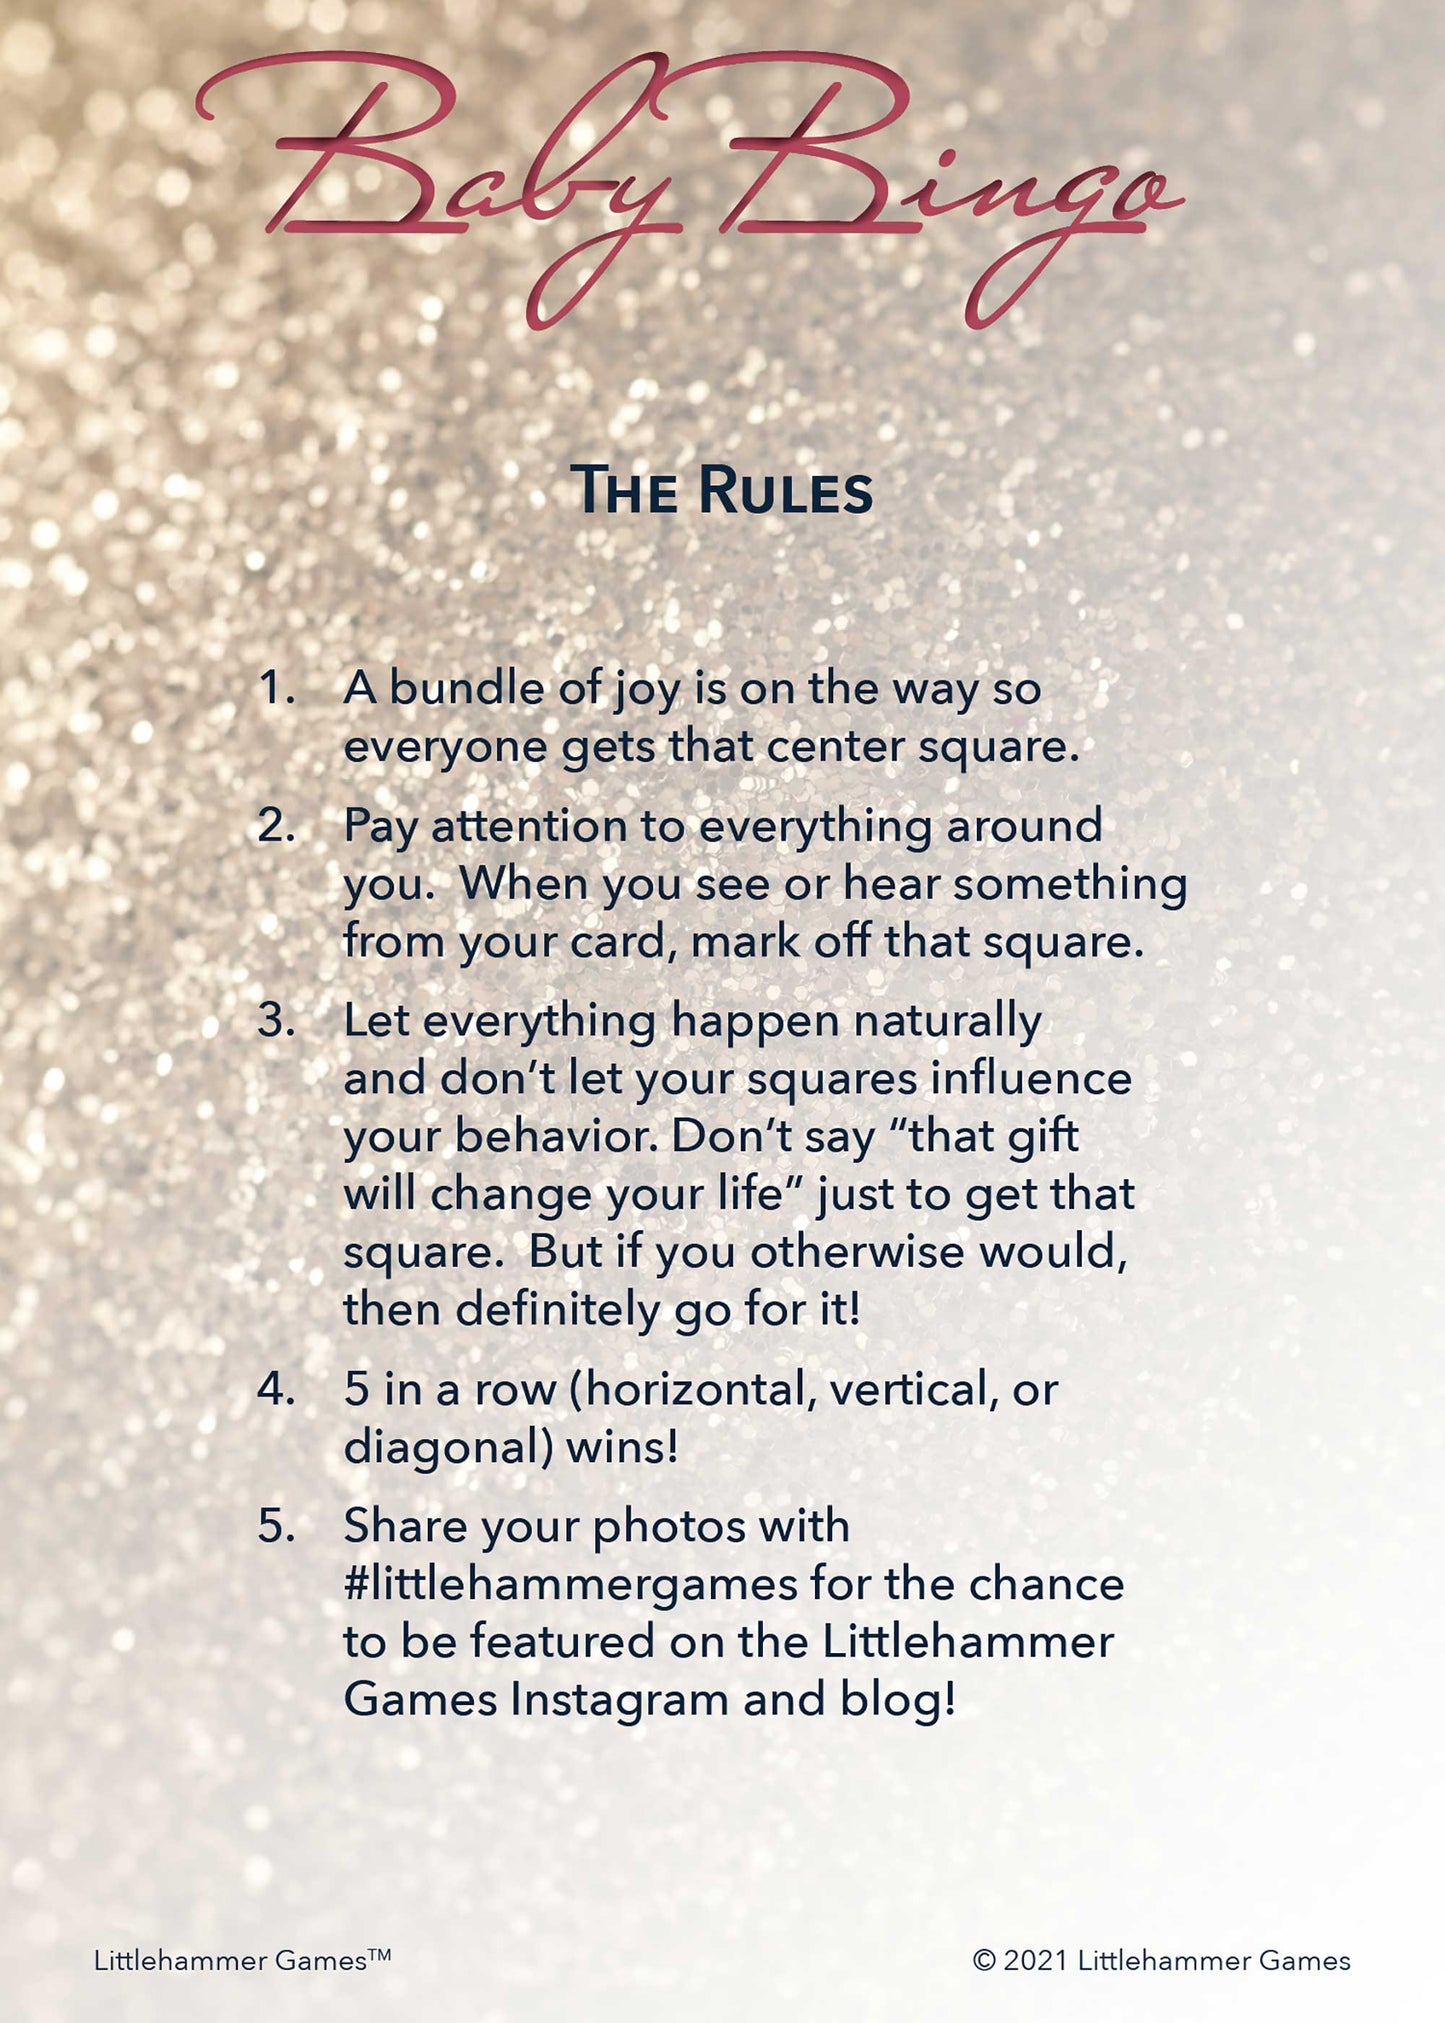 Baby Bingo rules card with a glittery rose gold background